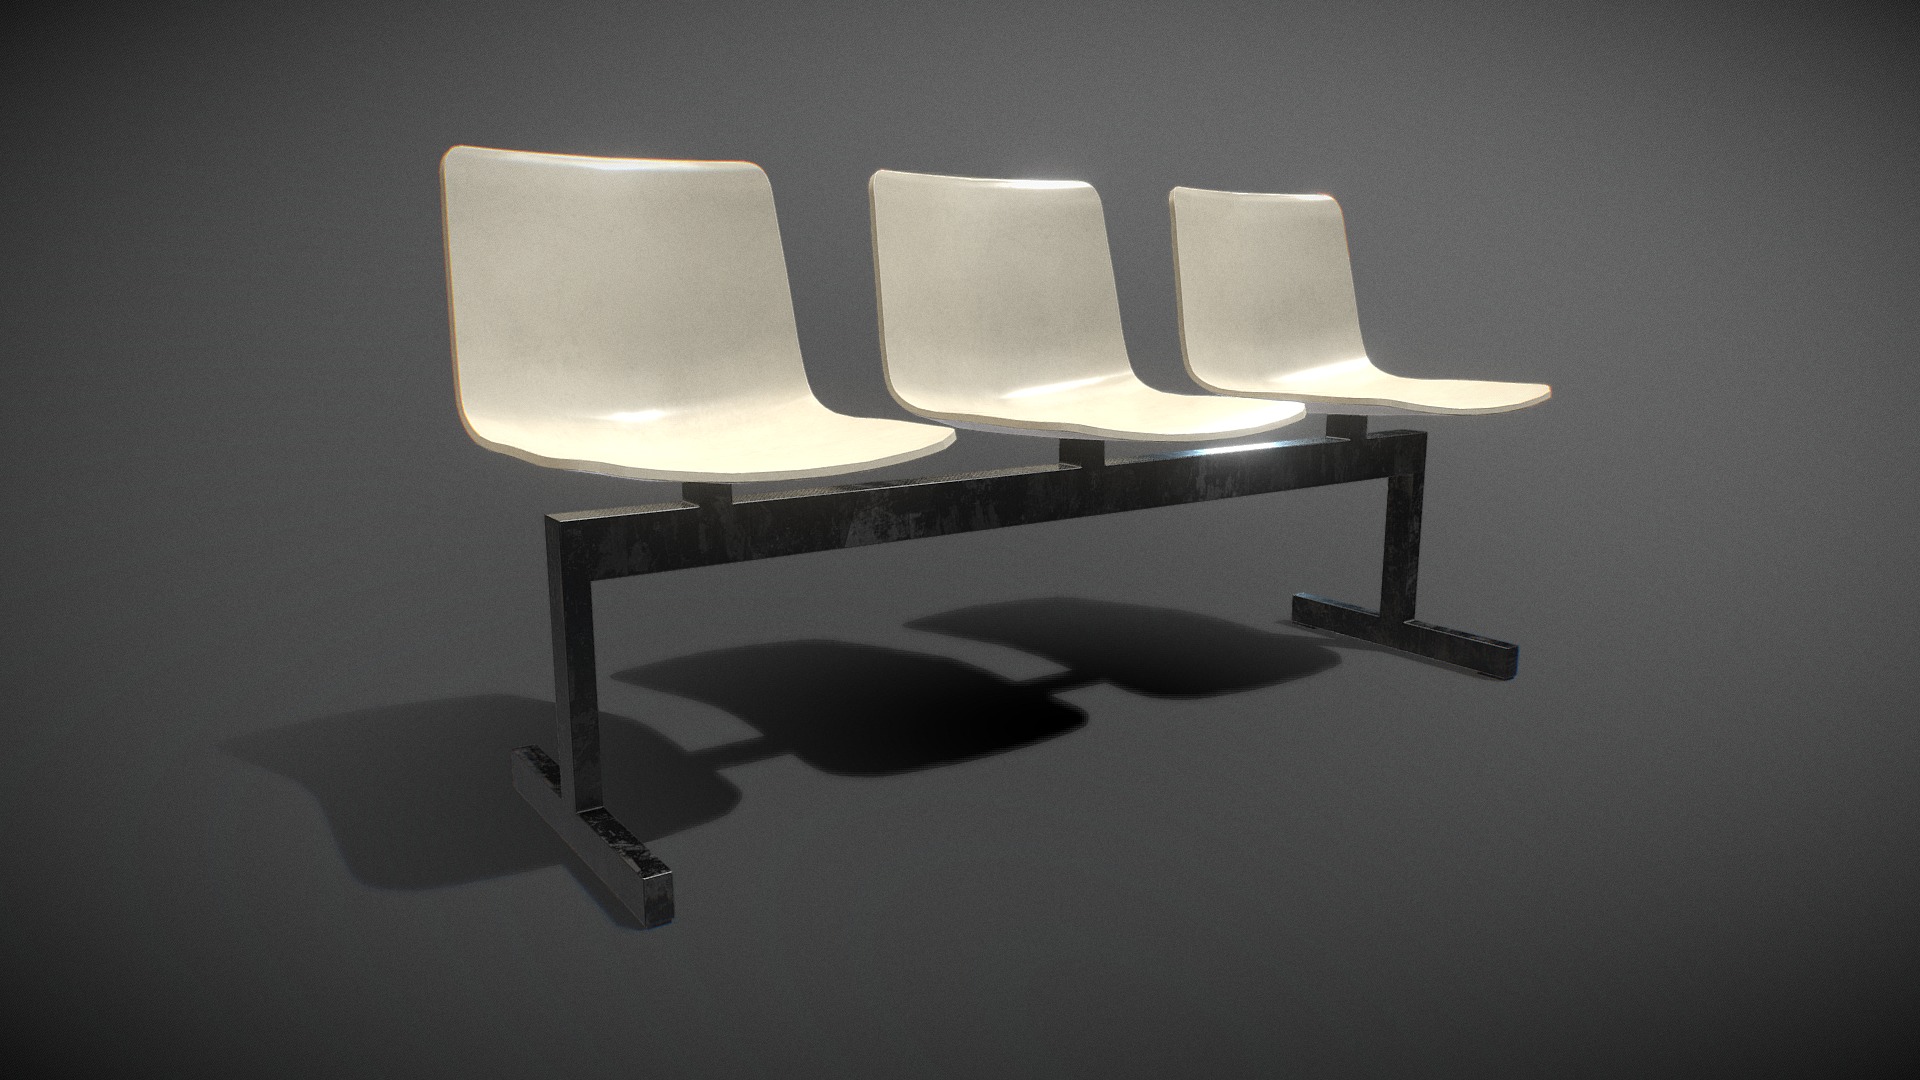 3D model Pato Bench-Steel Low-poly - This is a 3D model of the Pato Bench-Steel Low-poly. The 3D model is about a table with a lamp on it.